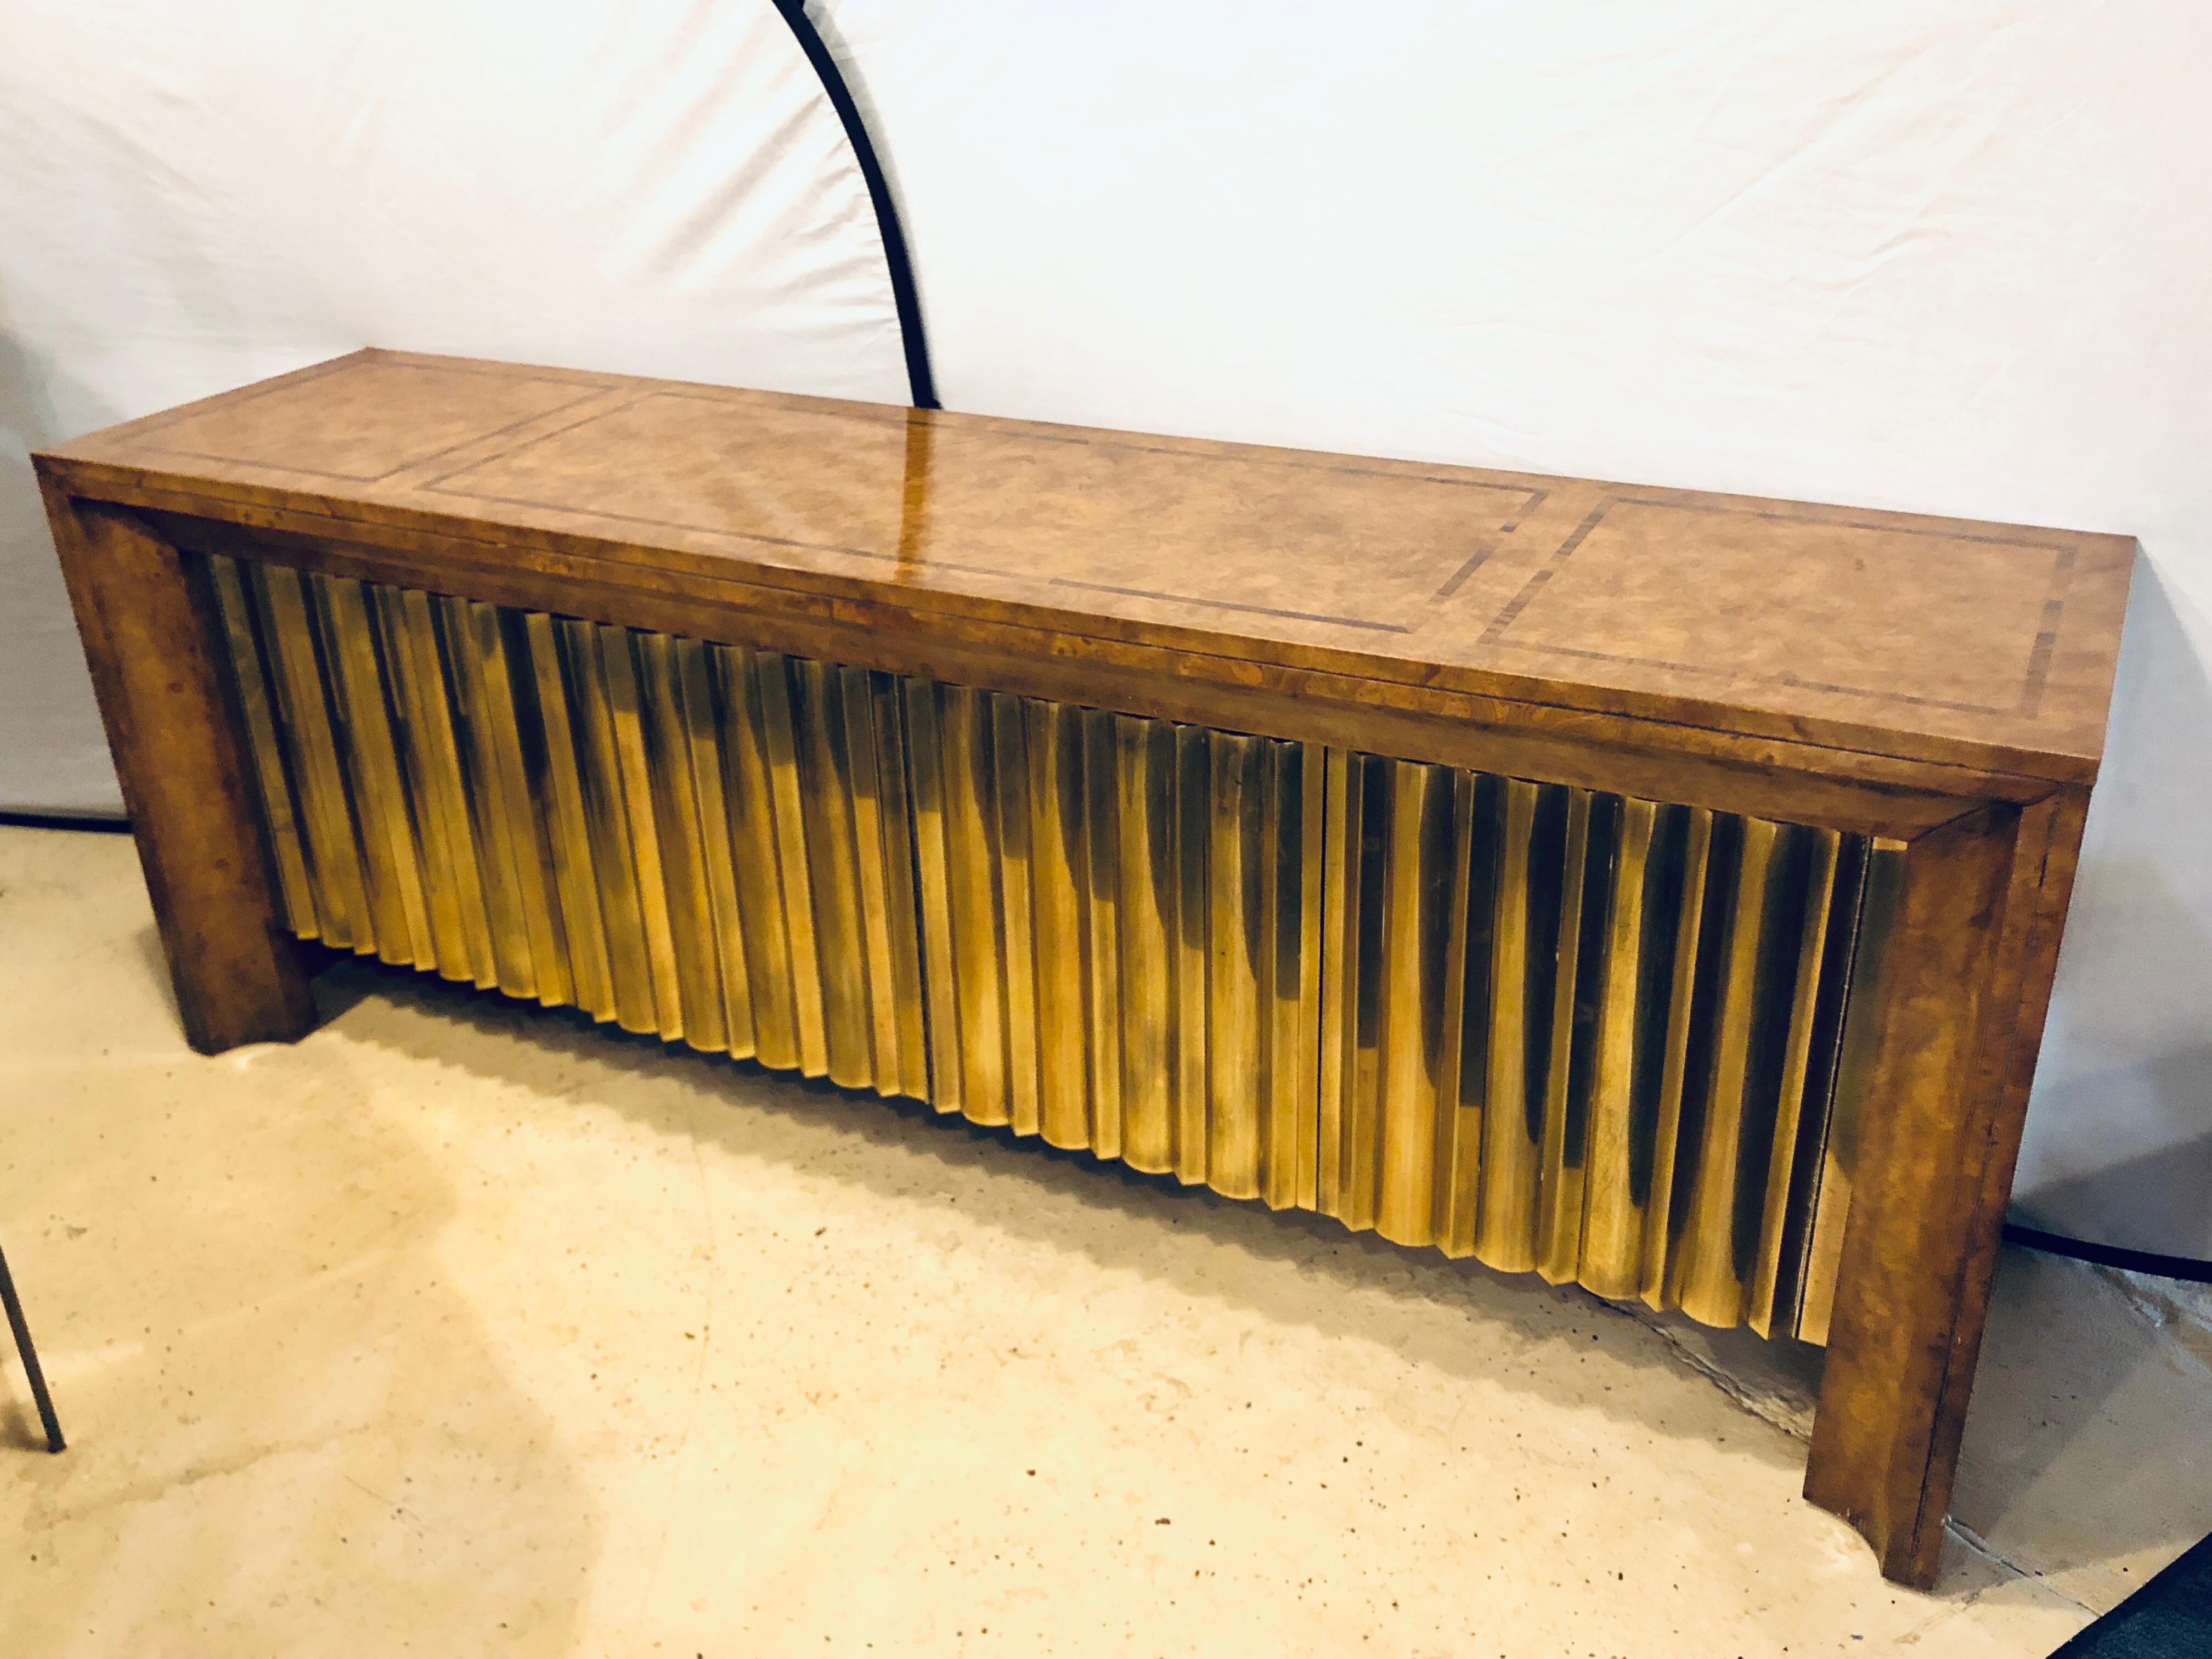 Large burl and brass credenza or buffet with rosewood inlay by Mastercraft, 1970s. Part of a dining table and fourteen chairs sold separately. This piece along with the others would make an outstanding dining set. Impressive large scale credenza,